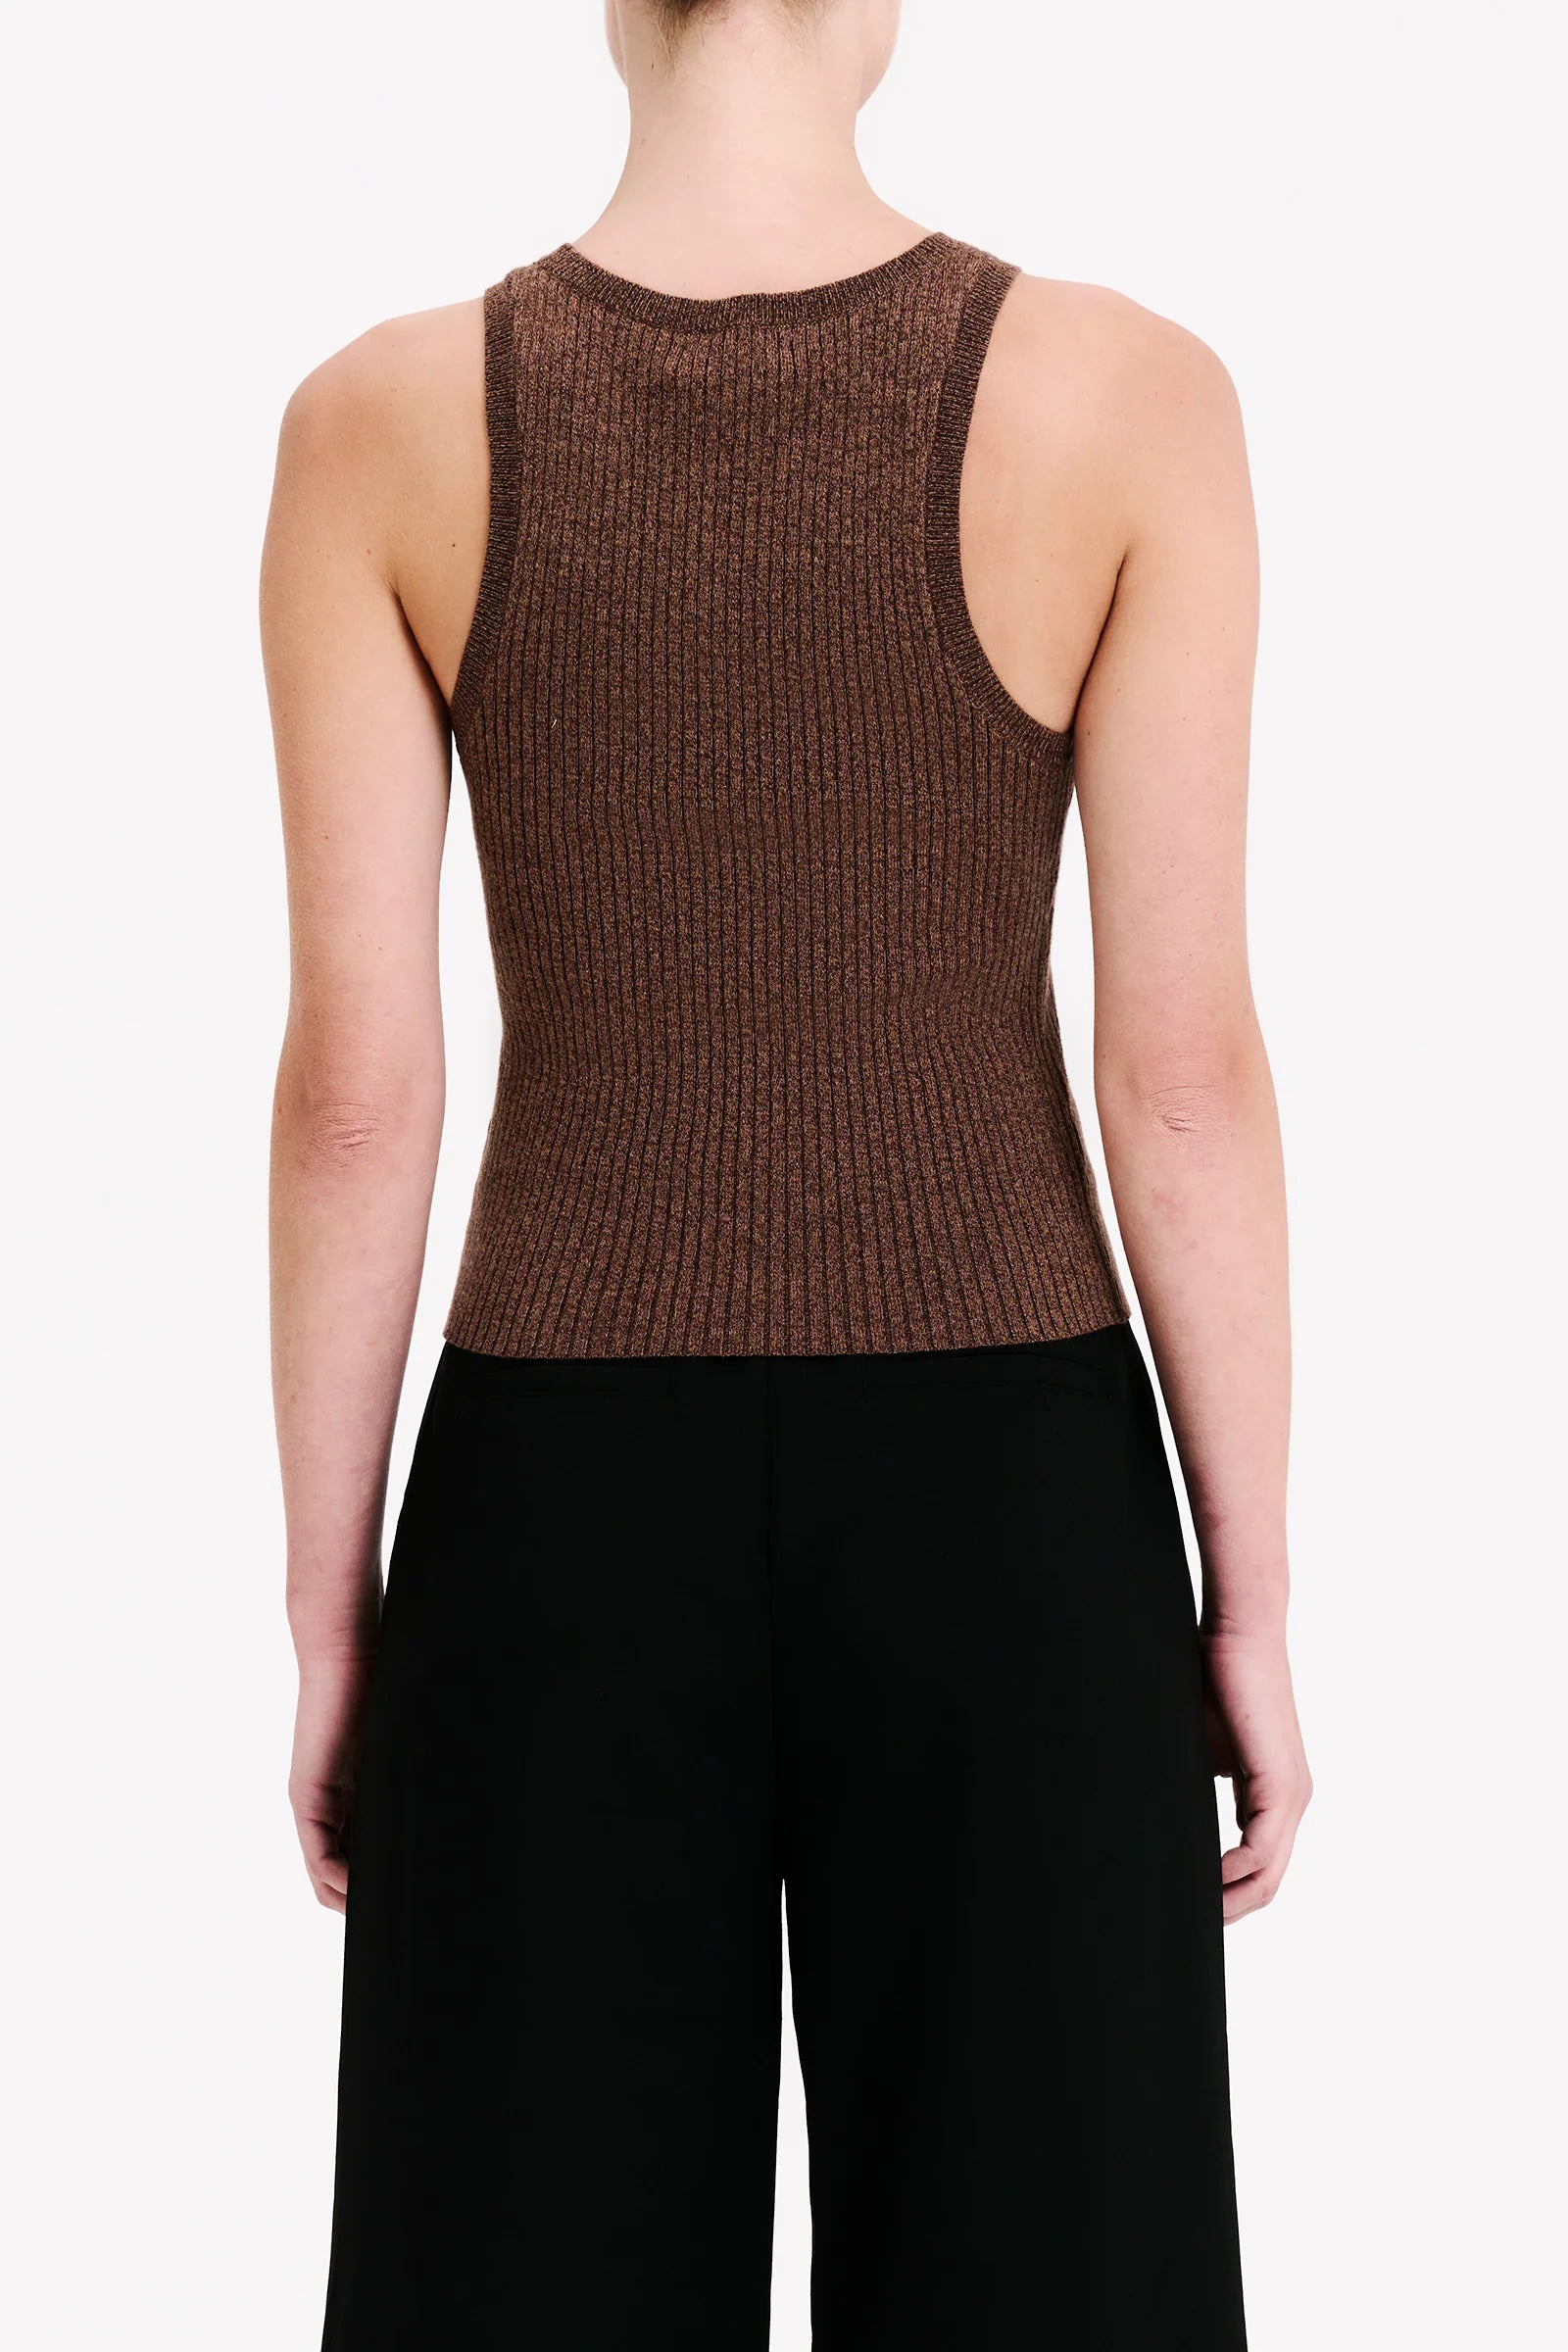 Nude Lucy Nude Classic Knit Tank Cola